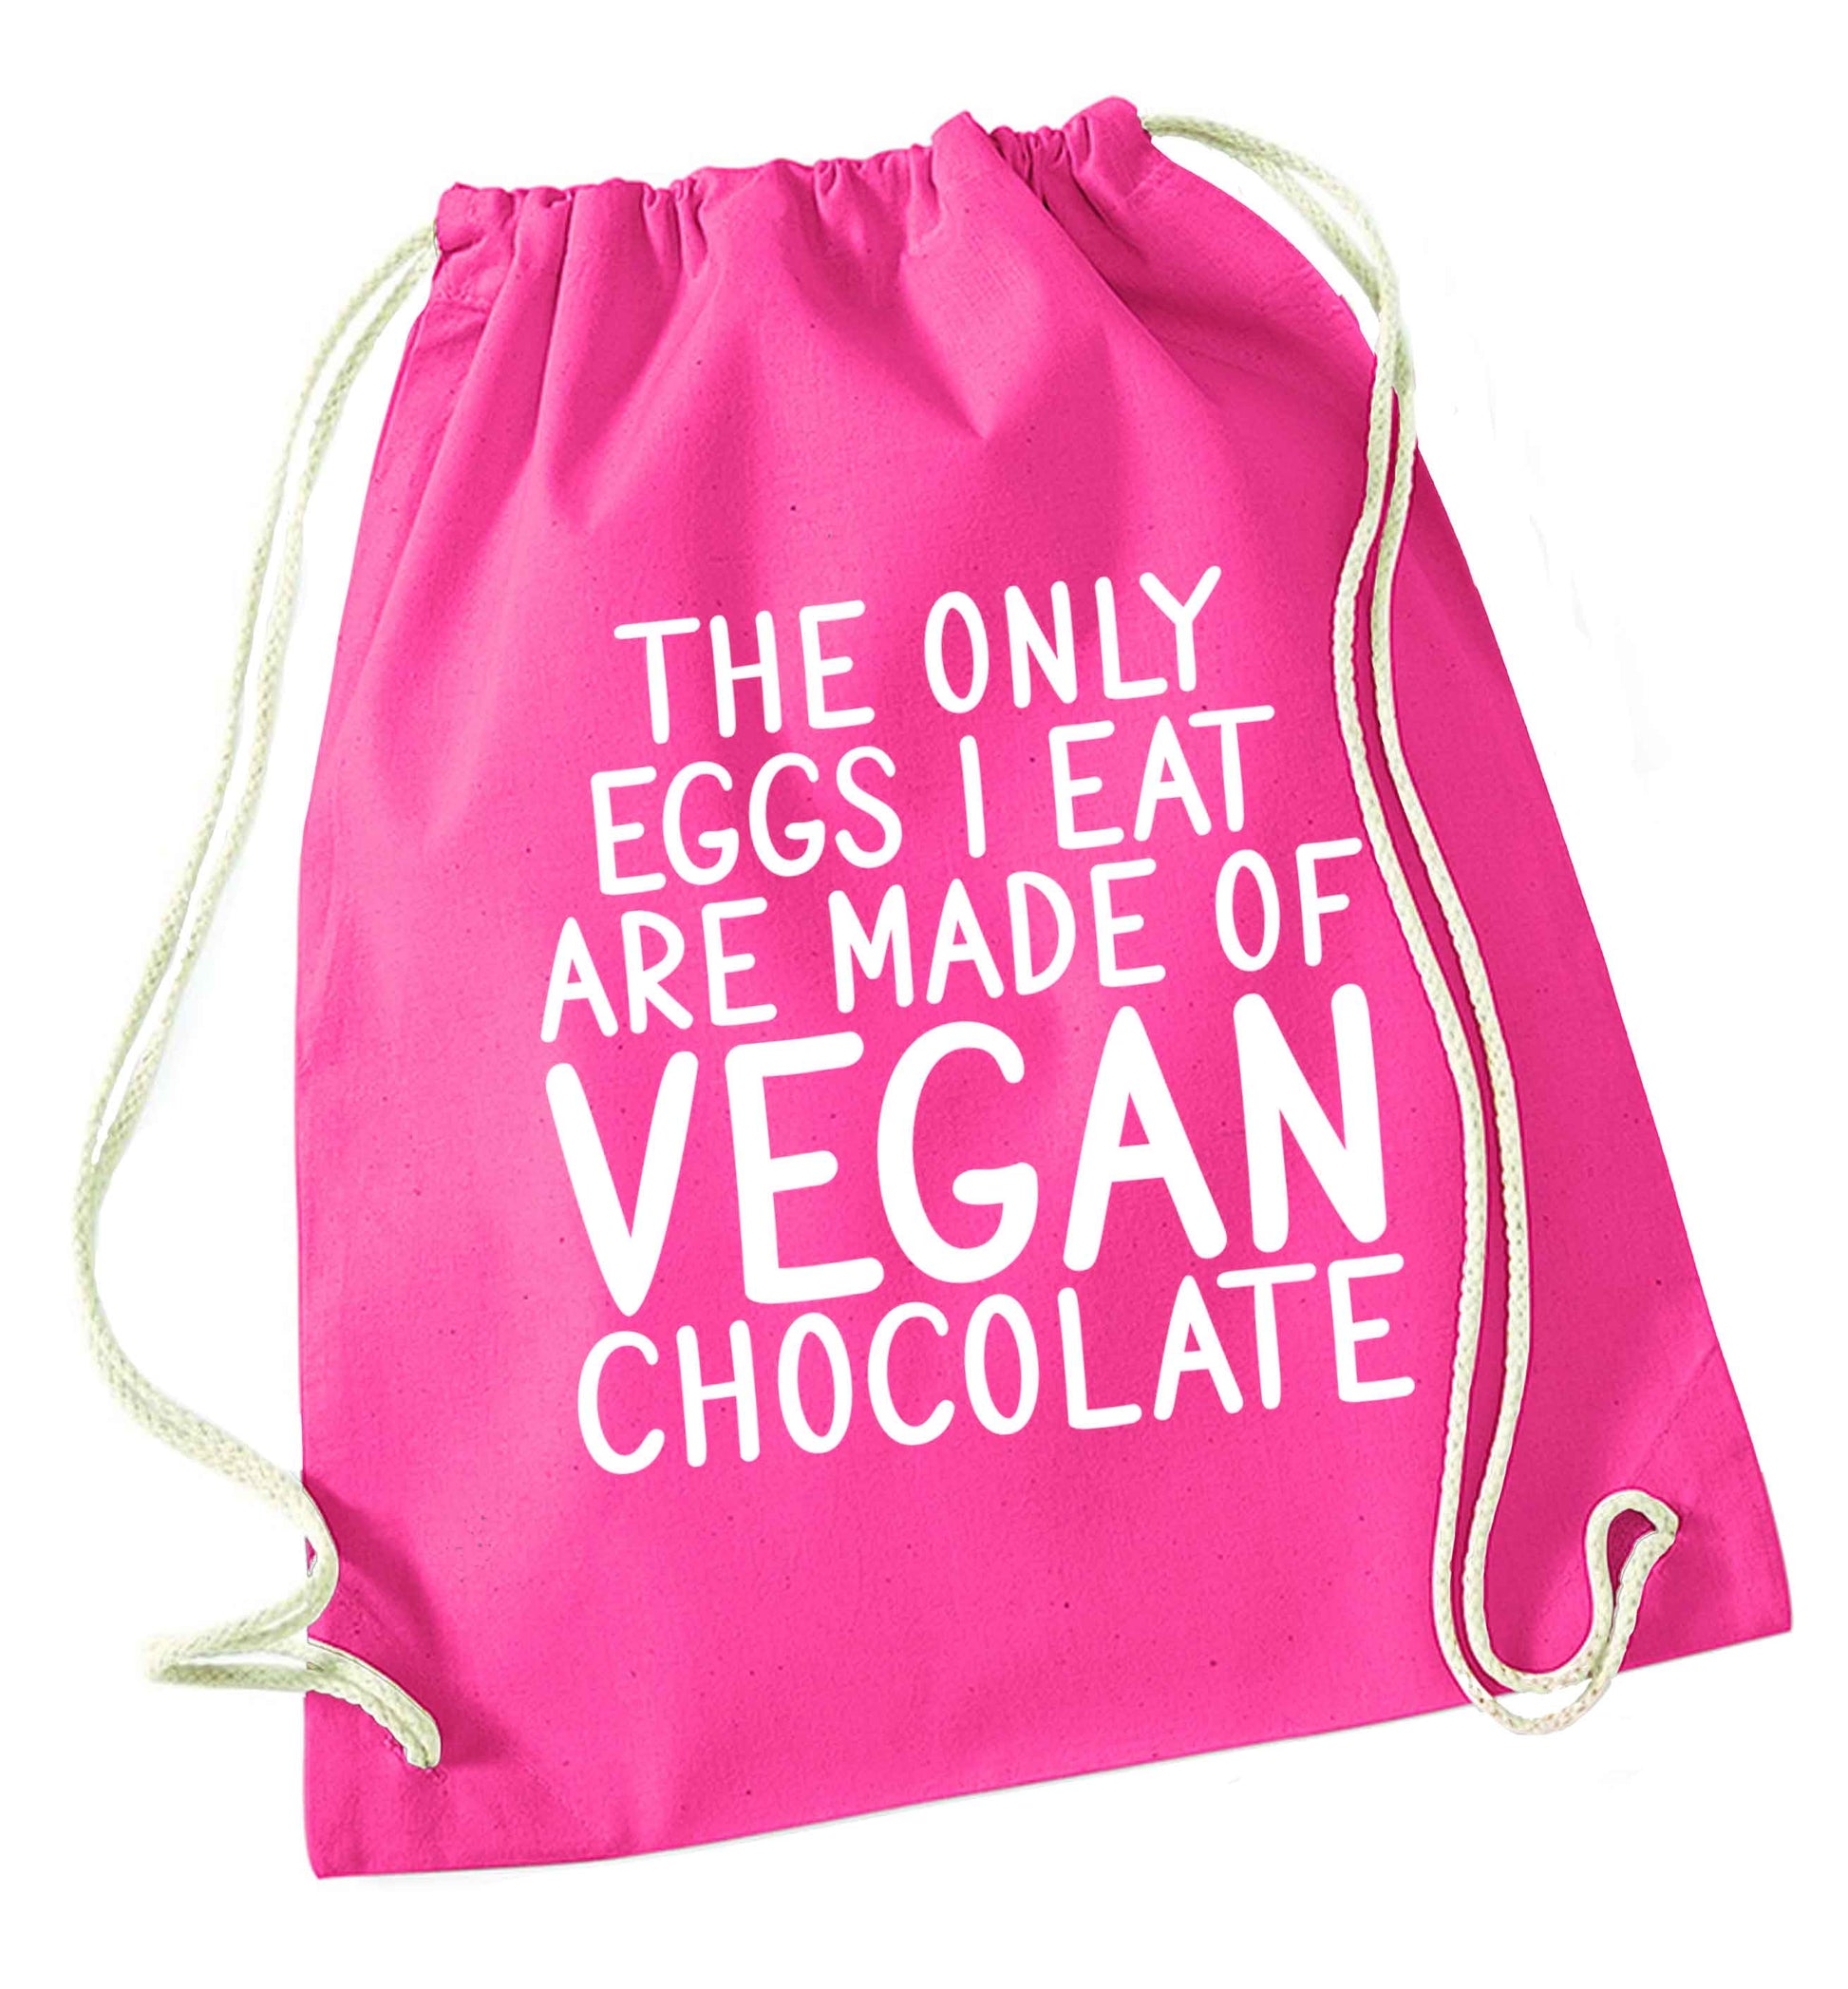 The only eggs I eat are made of vegan chocolate pink drawstring bag